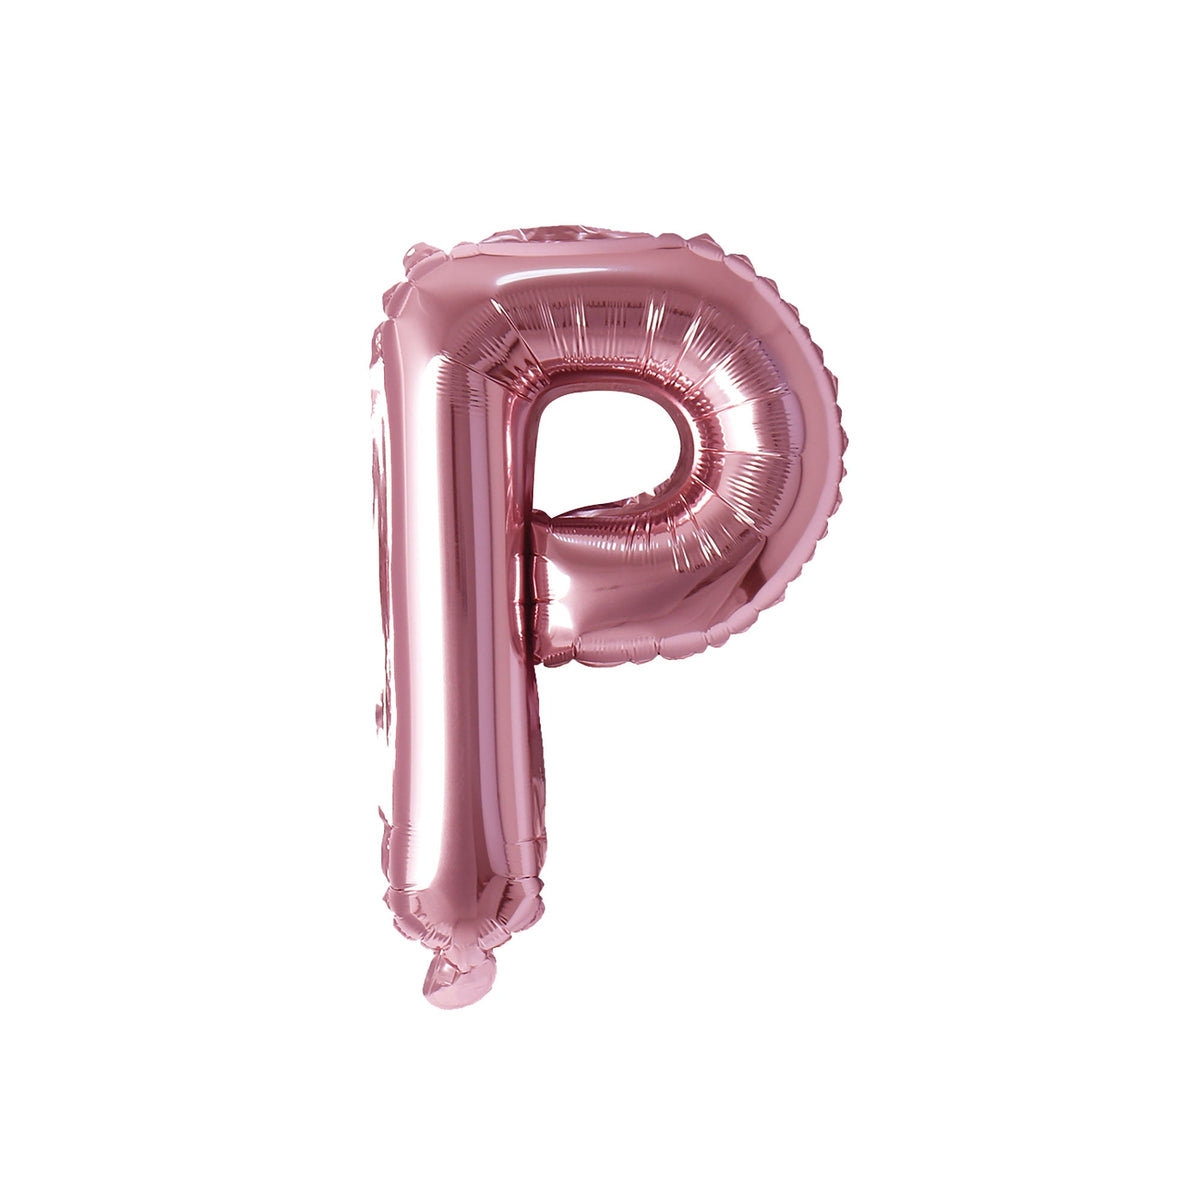 PARTY EXPERT Balloons Rose Gold Letter P Foil Balloon, 16 Inches, 1 Count 810064194344